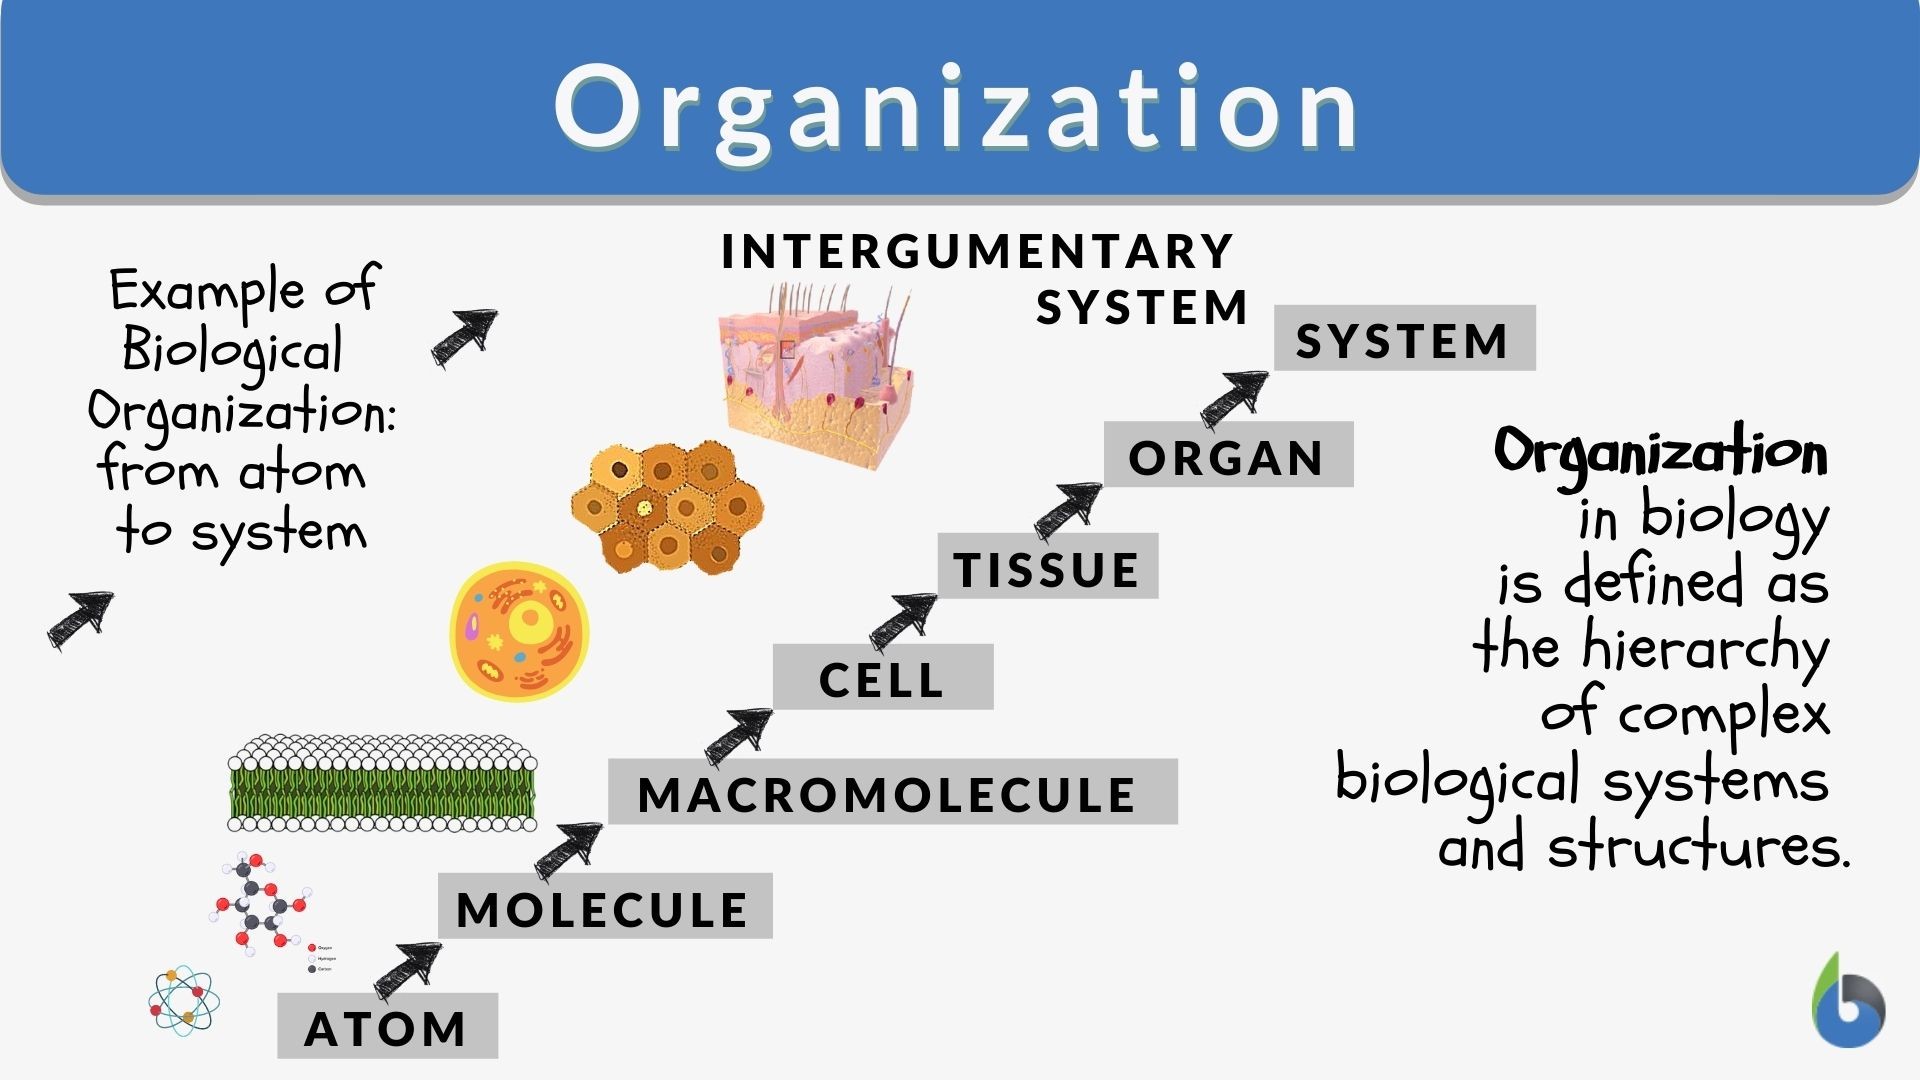 remaining Permanent easy to handle Organization - Definition and Examples - Biology Online Dictionary